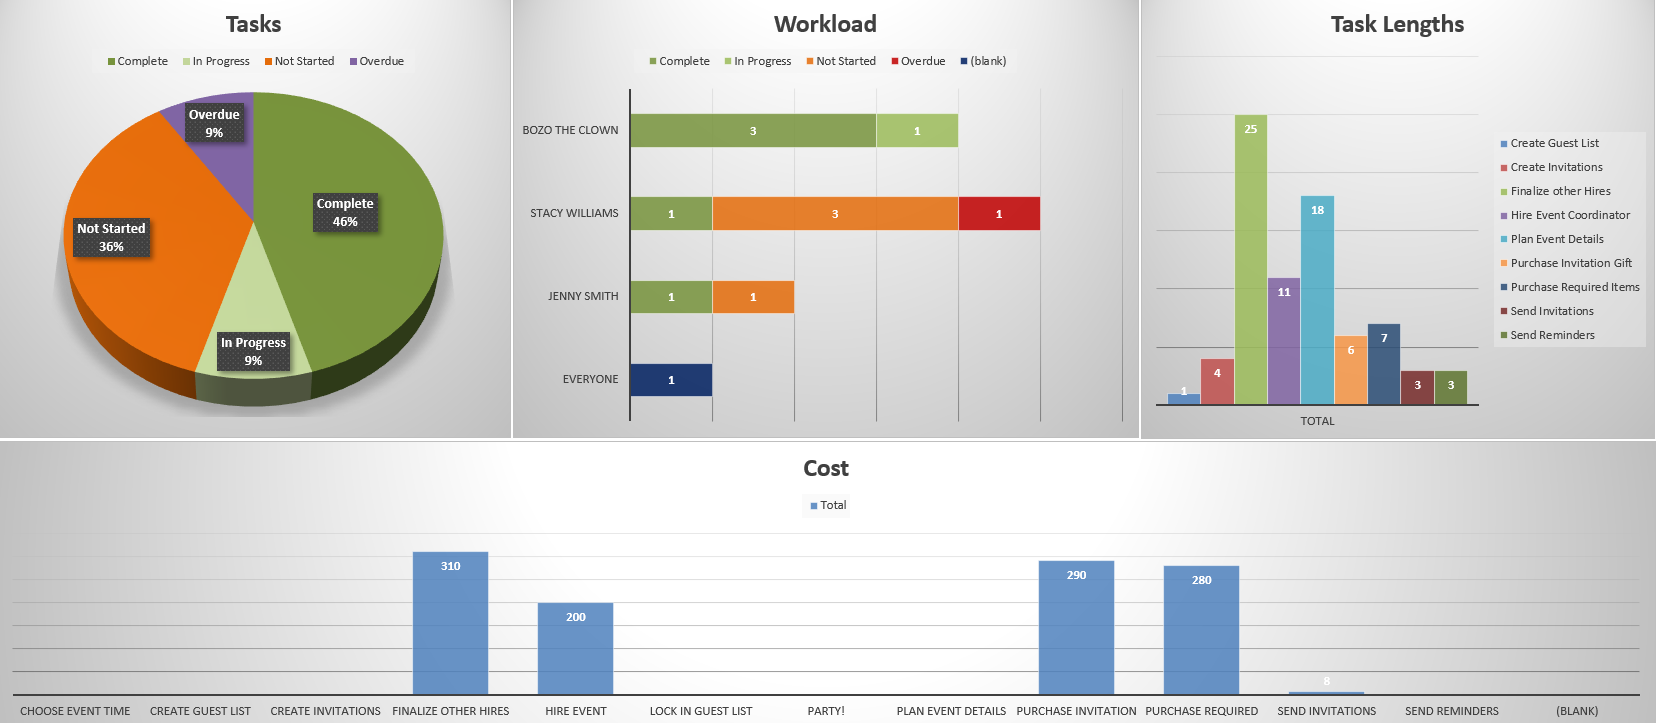 Project Management Dashboard Template featuring tasks, workload, task lengths and costs